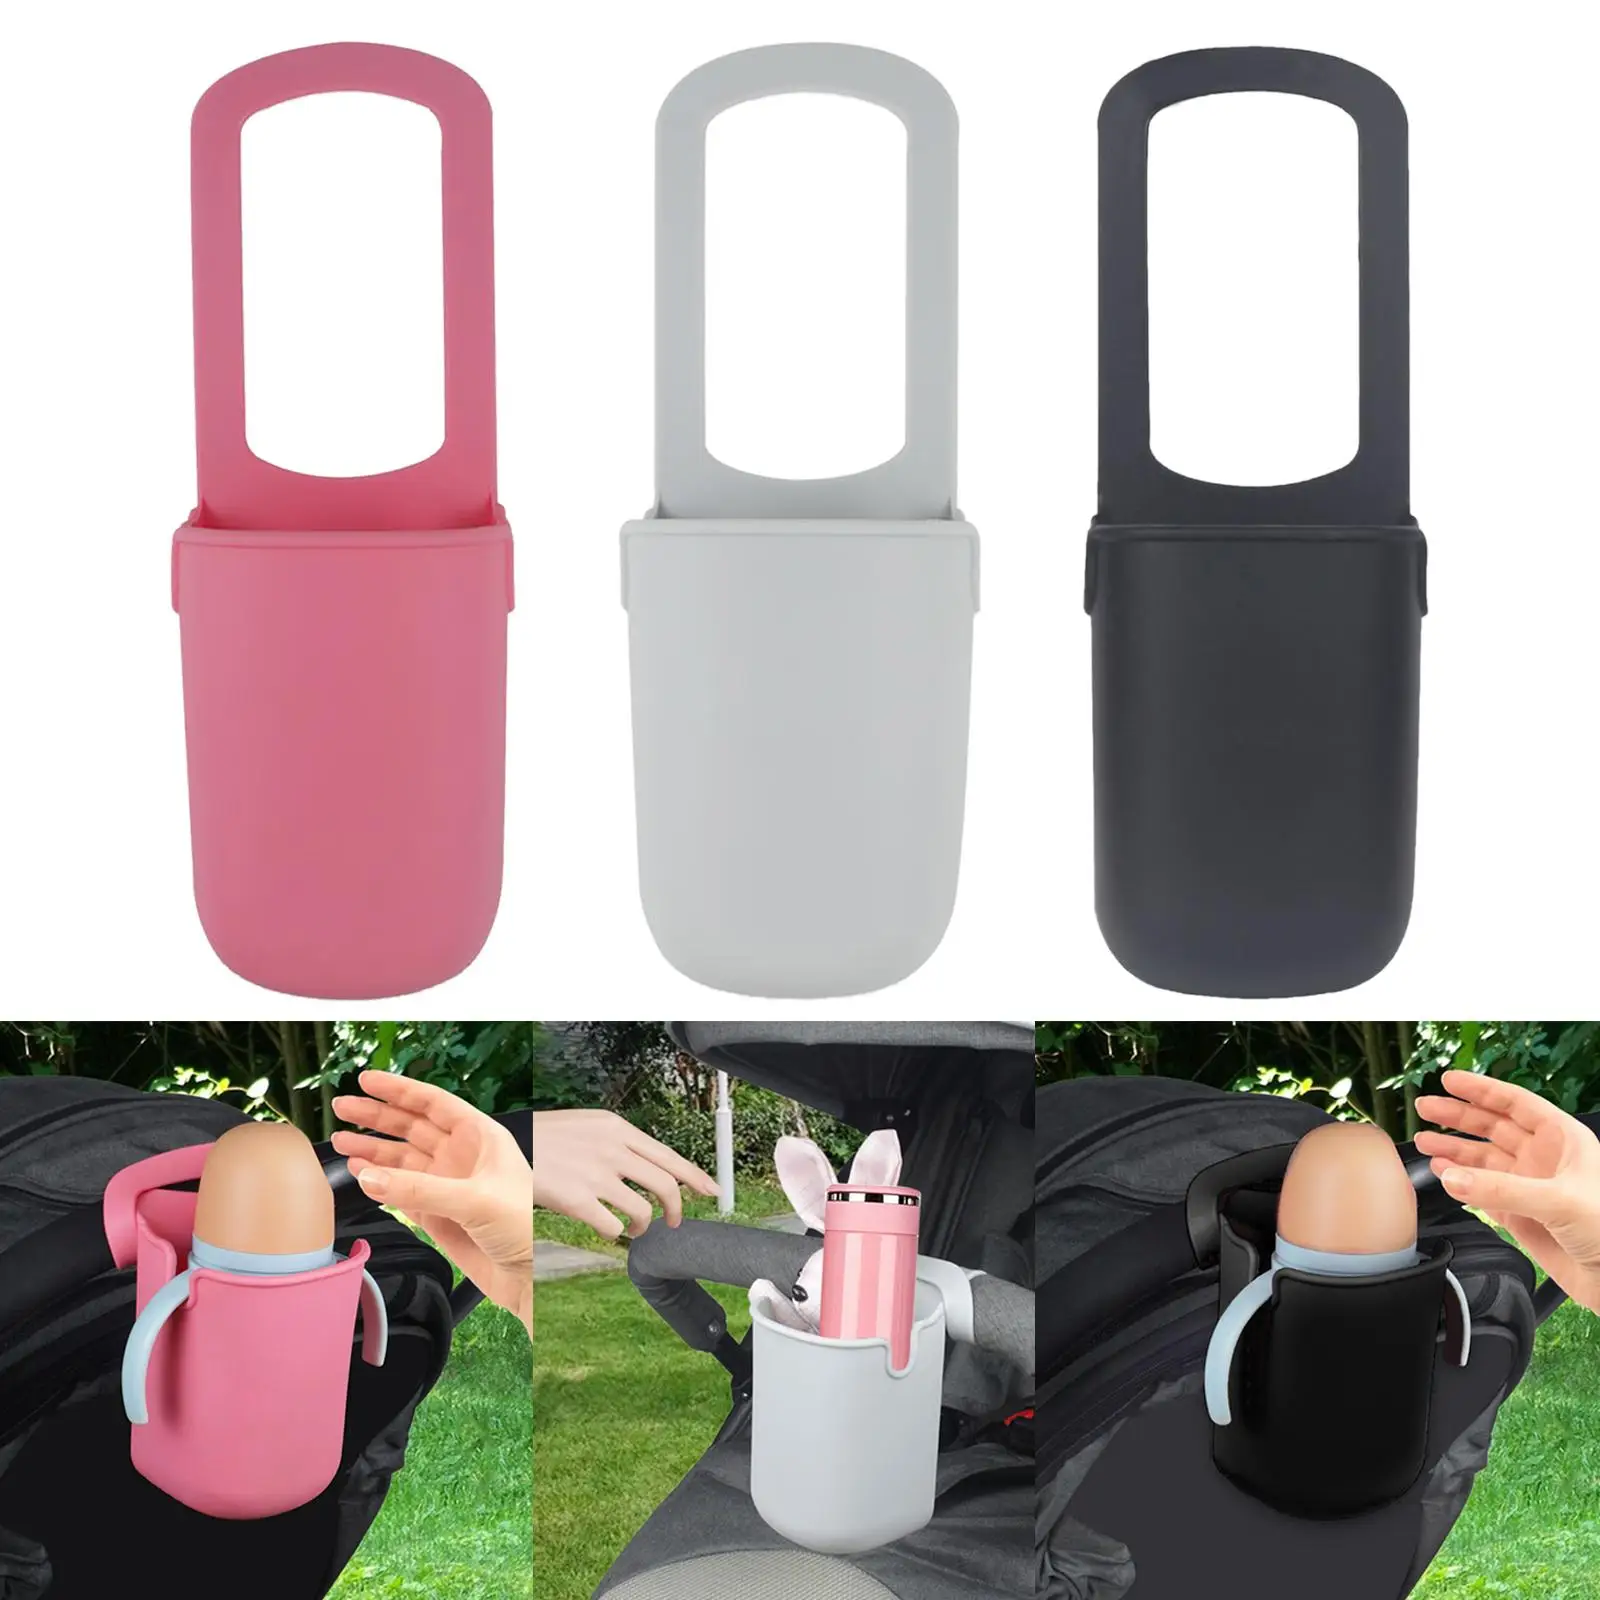 Bike Cup Holder Keys Bike Water Bottle Holder Silicone Stroller Cup Holder for Pushchair Stroller Tricycle Picnic Lawn Chairs